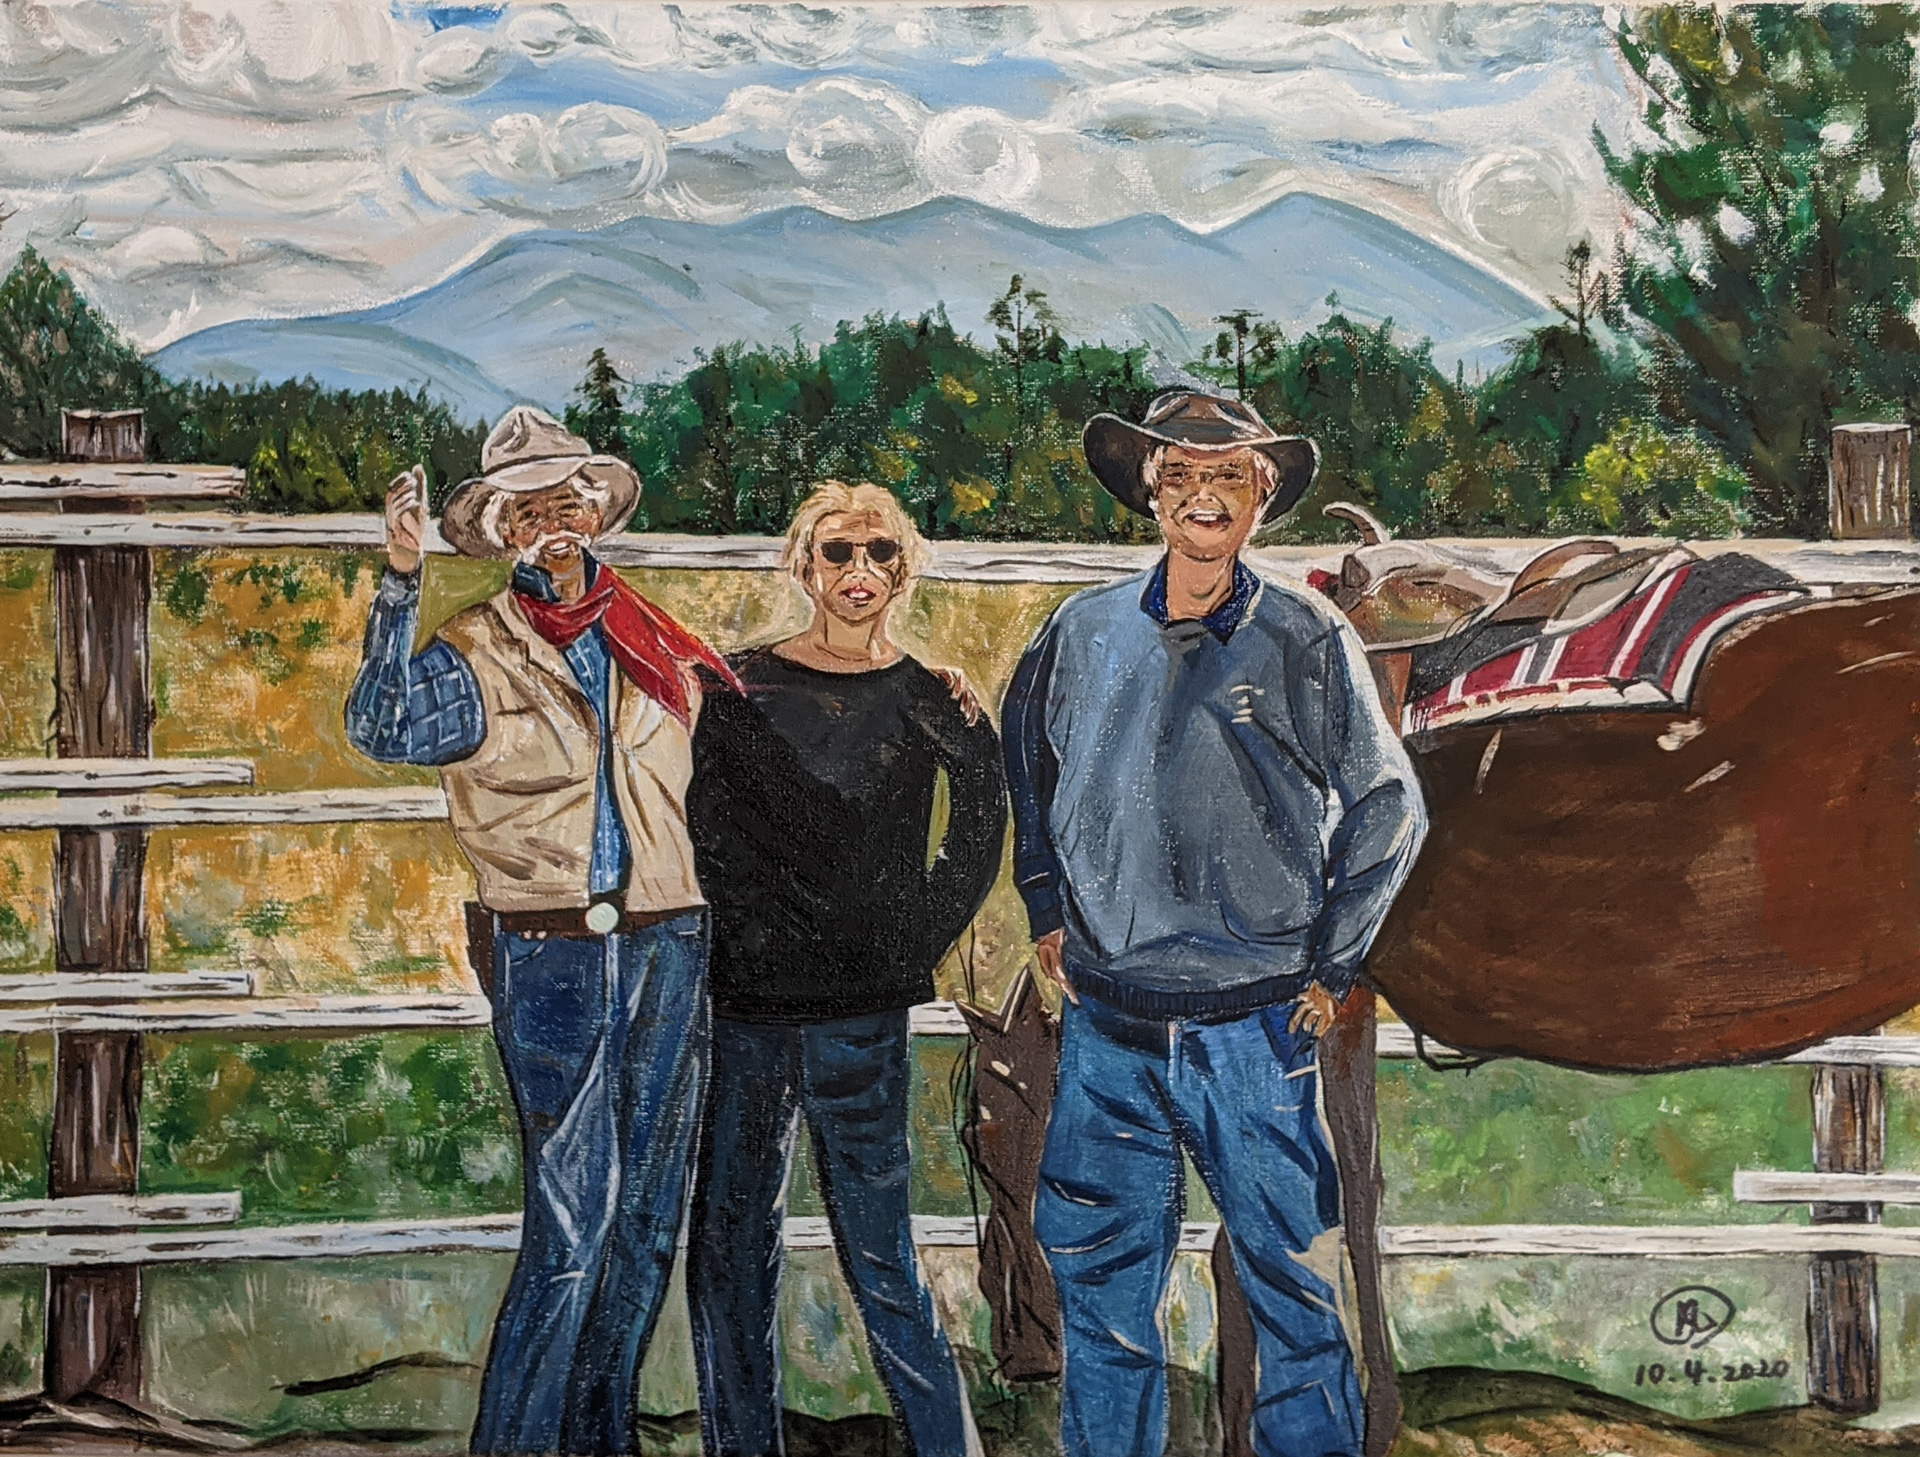 Friends in Telluride, Colorado Oil painting canvas size 17″ x 23.5″